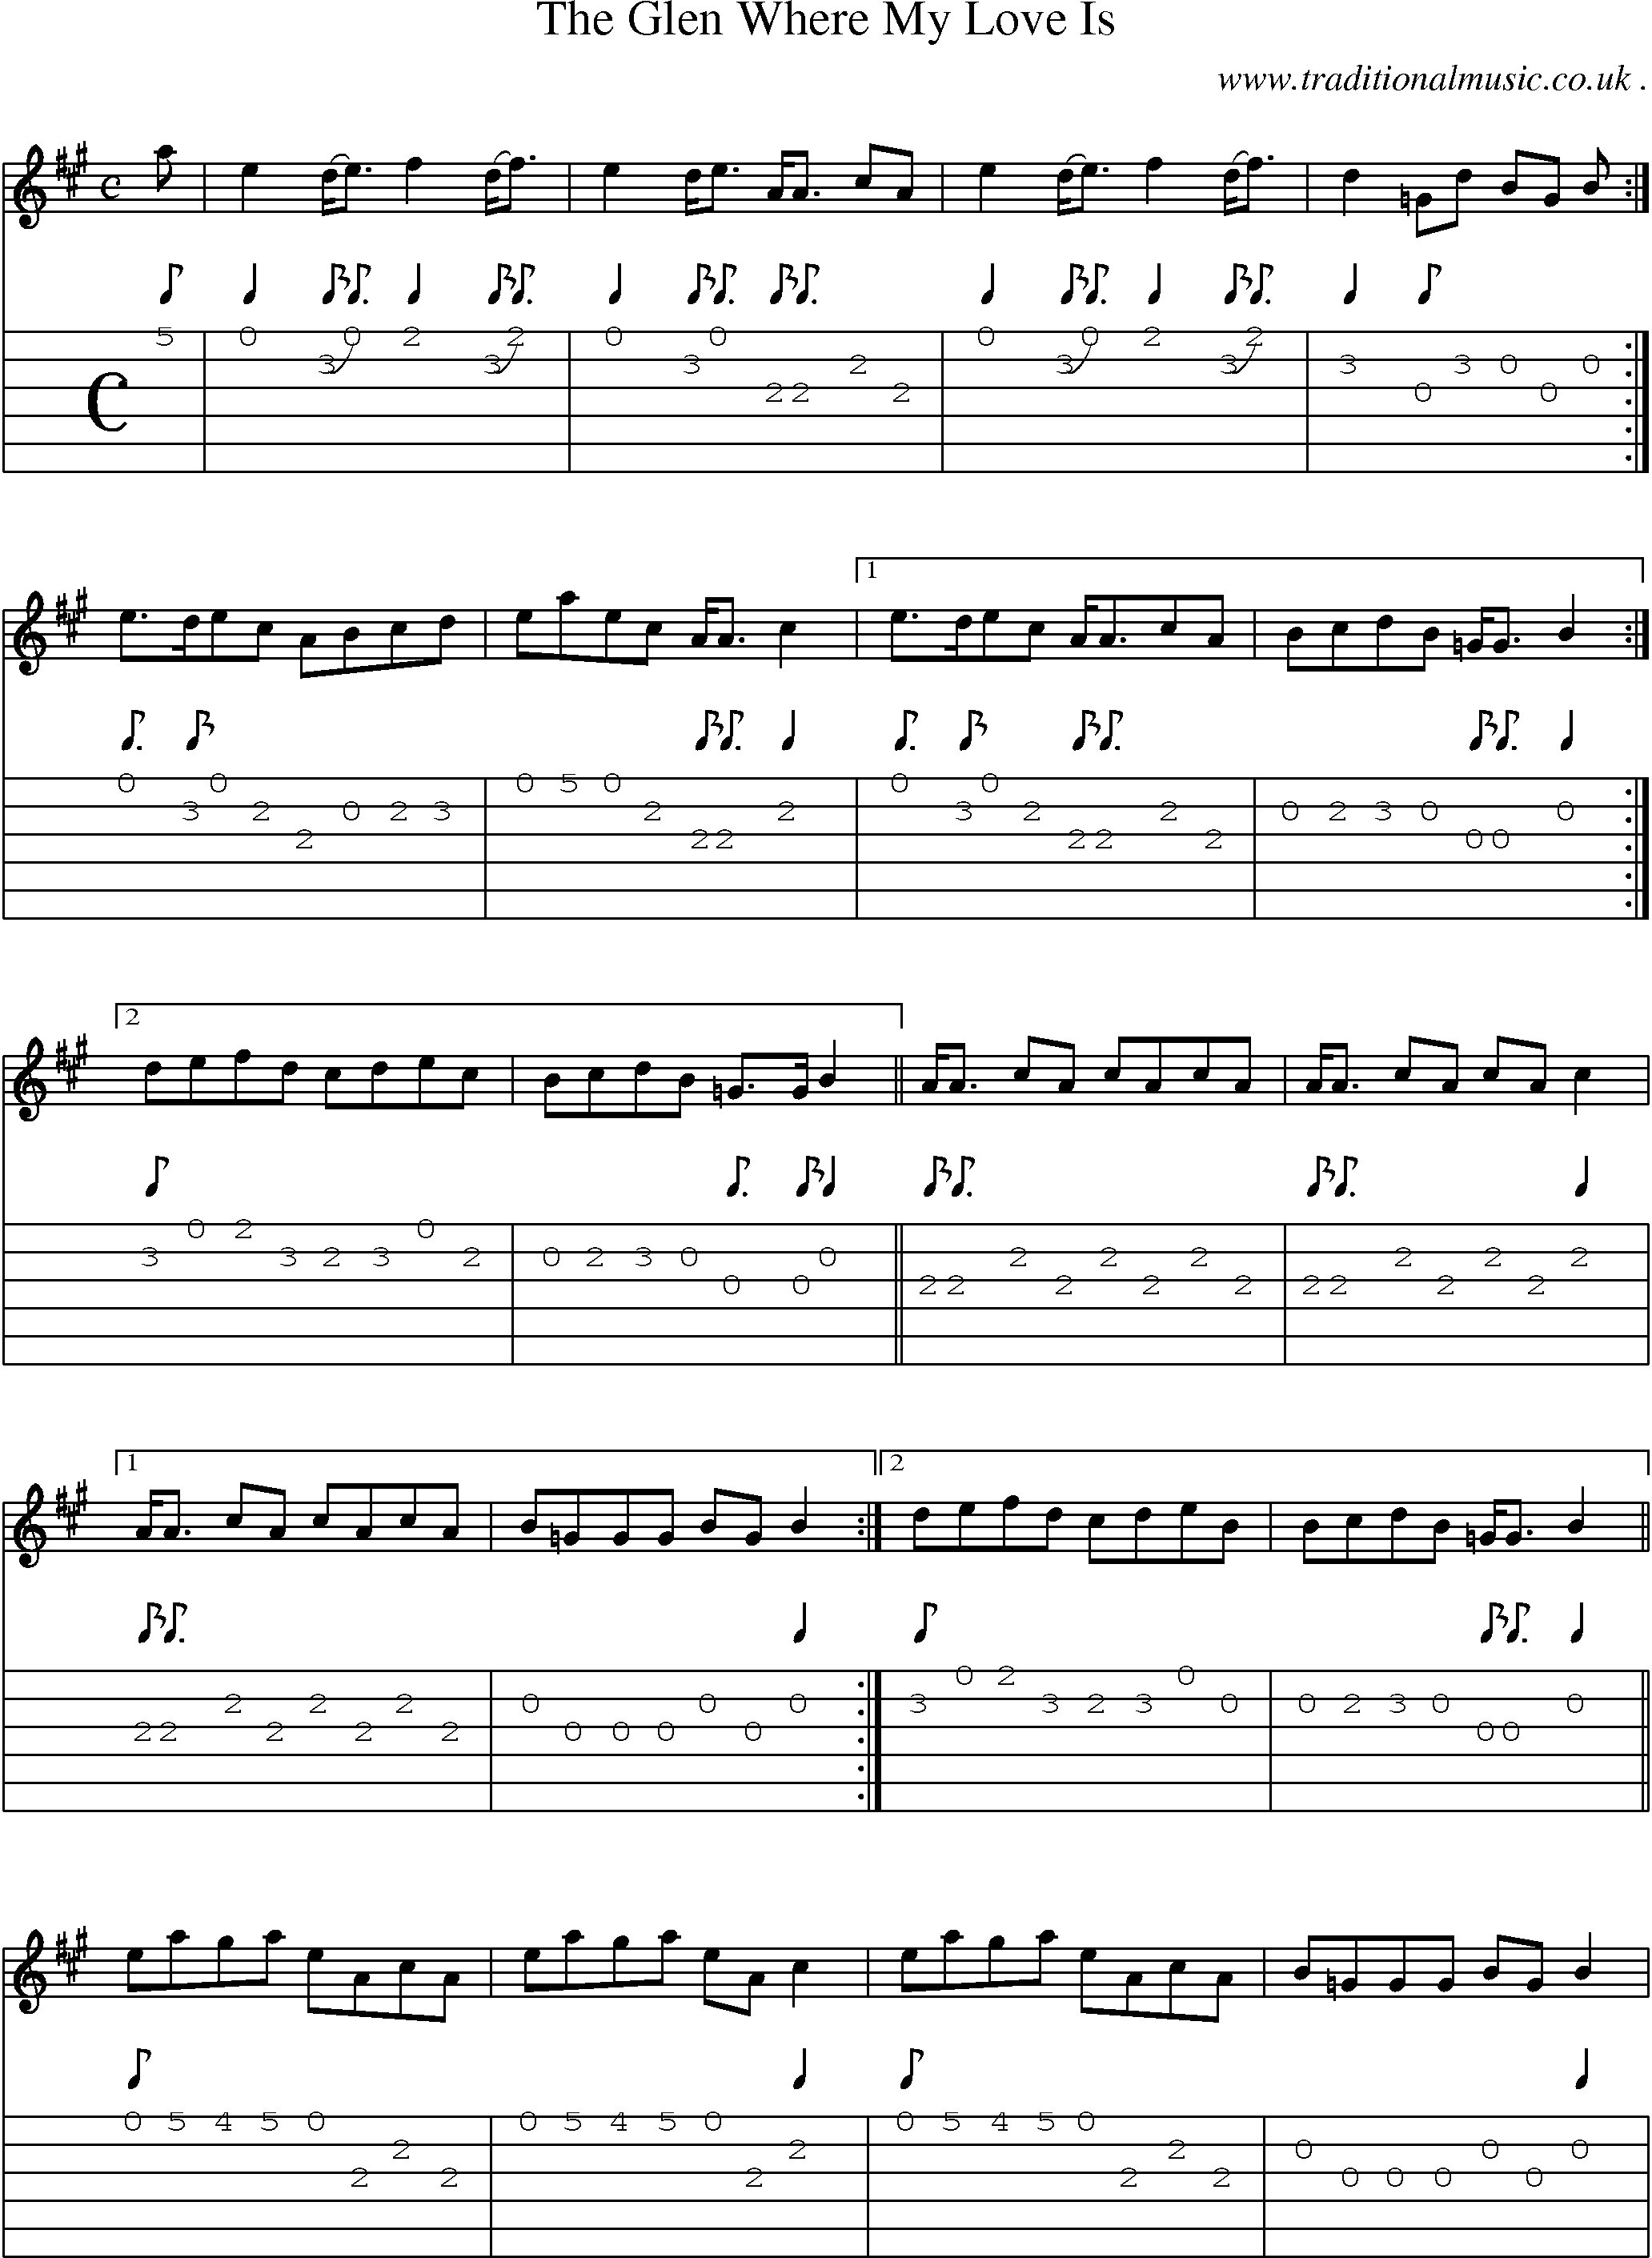 Sheet-music  score, Chords and Guitar Tabs for The Glen Where My Love Is